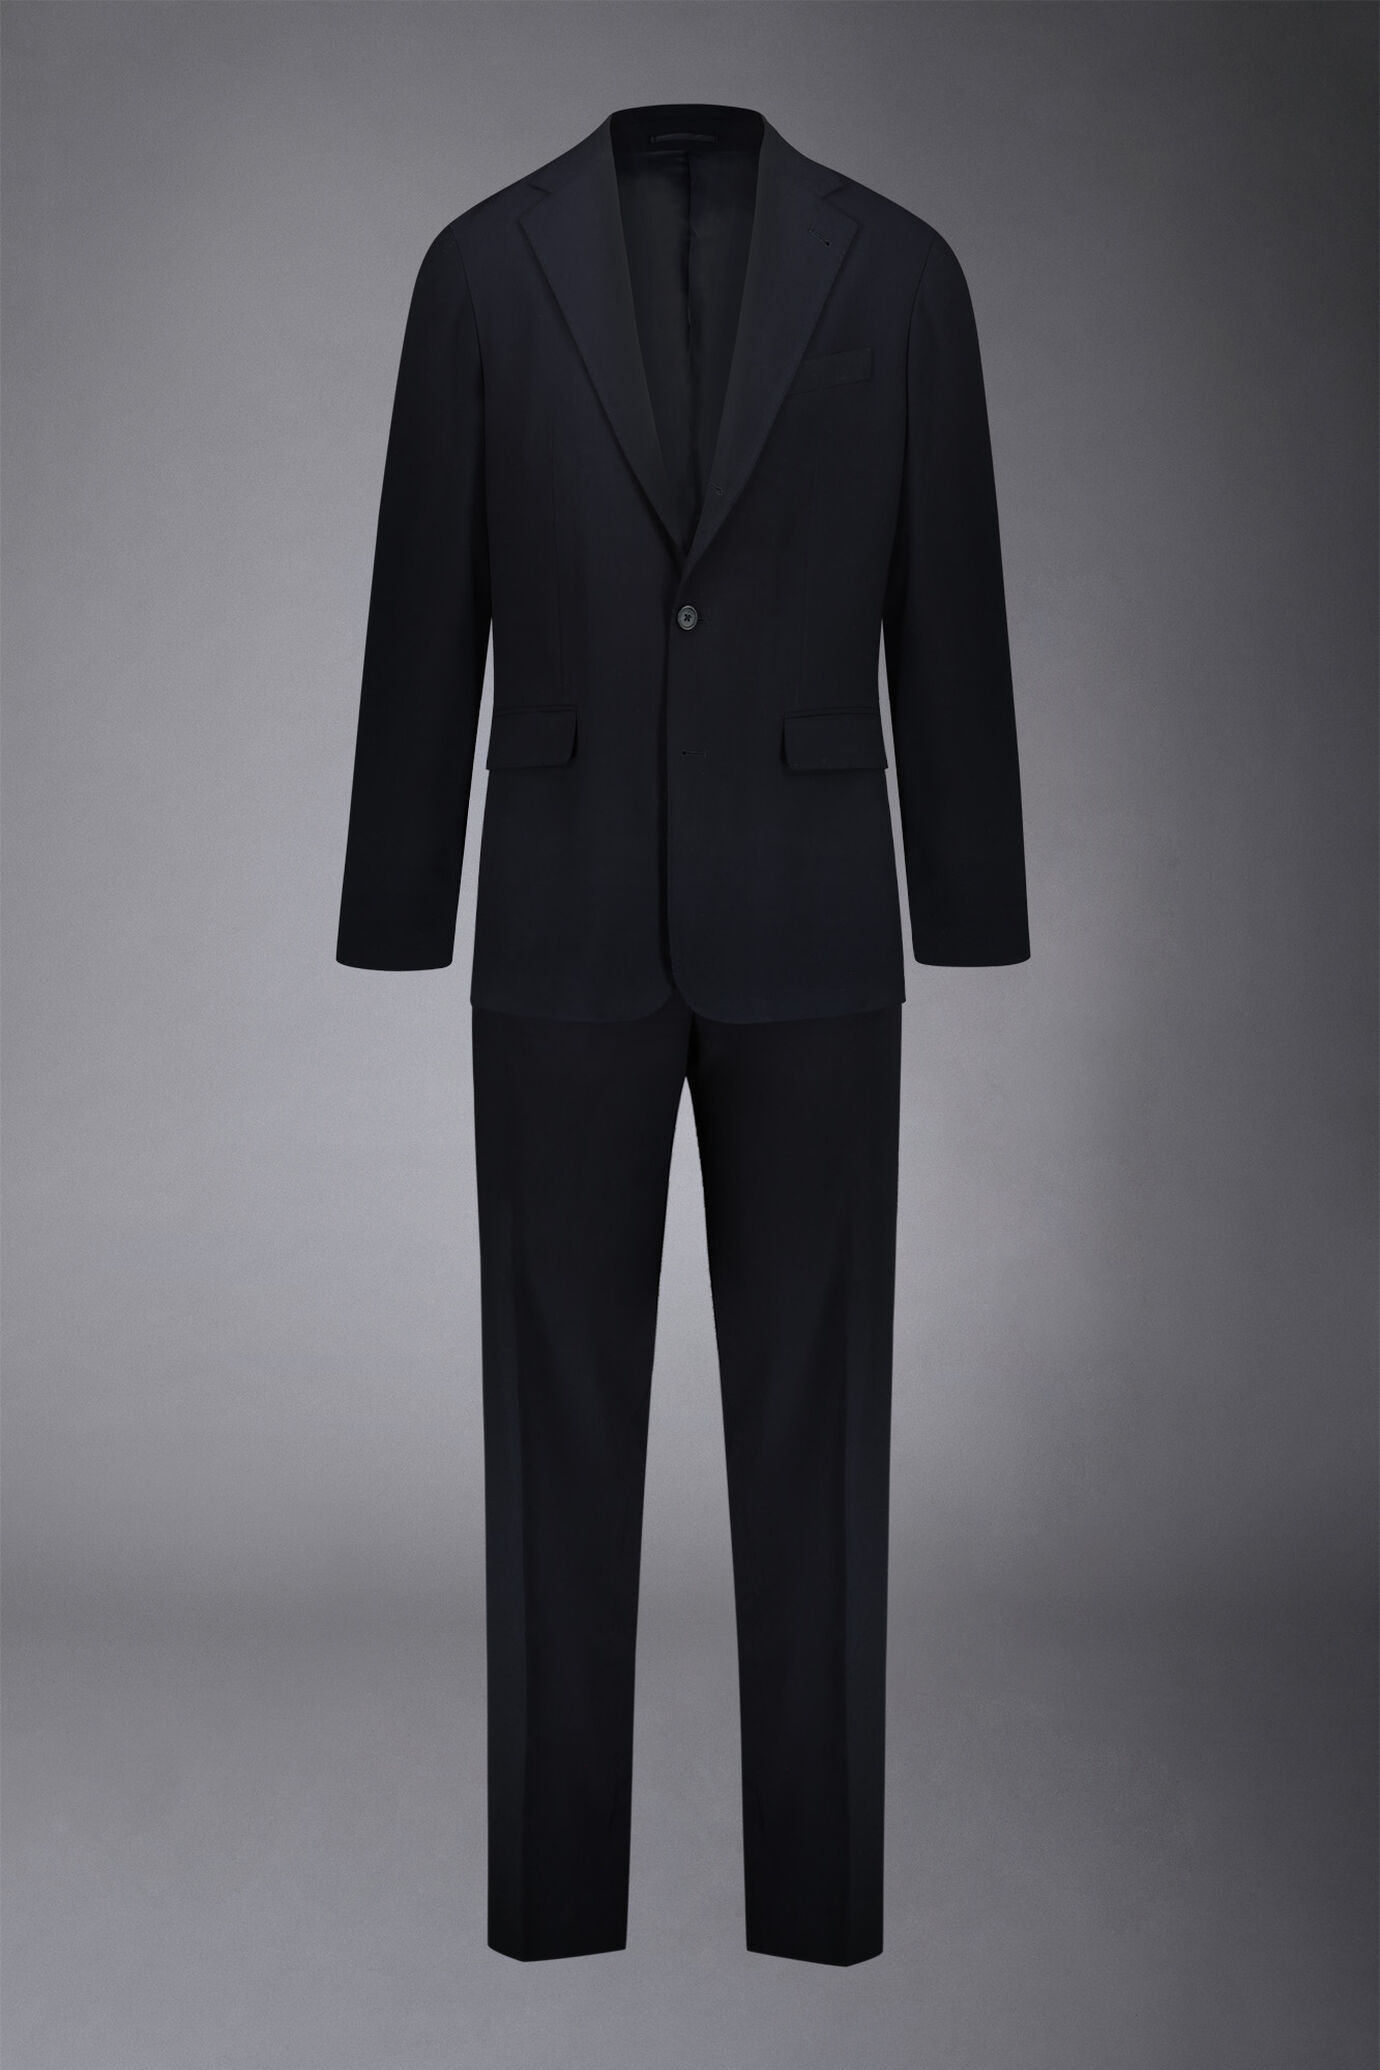 Men's single-breasted suit regular fit woven design fabric image number 8